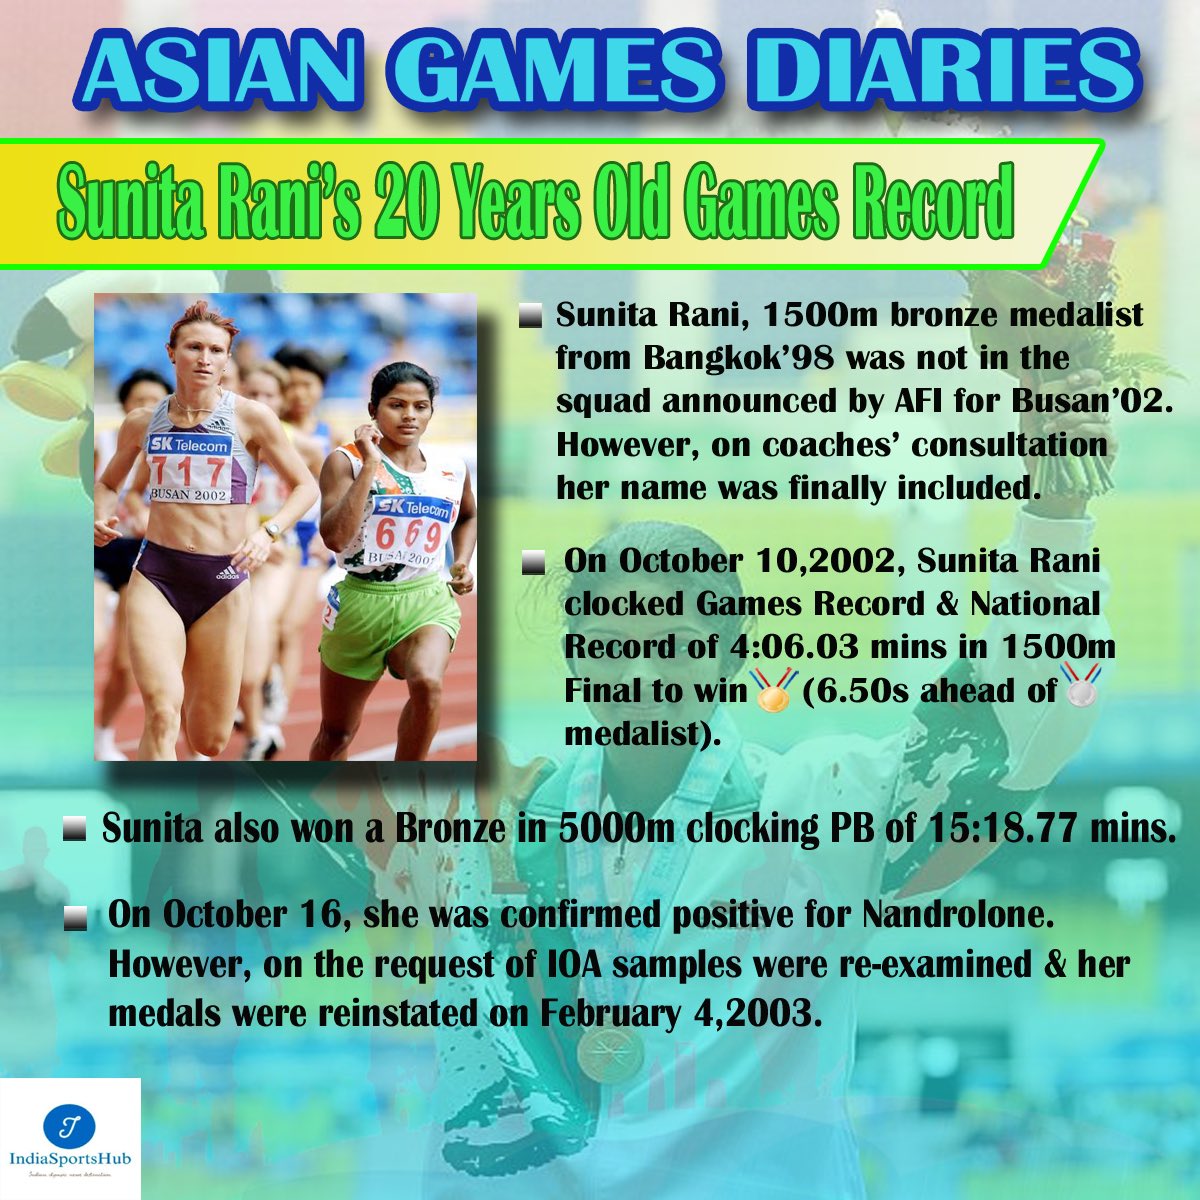 @DipayanD20 @kaypeem @BhutaniRahul @VishankRazdan @afiindia @Adille1 ASIAN GAMES ~ THE STORY OF SUNITA RANI

From being not part of squad to winning Gold

Then getting caught for doping to getting cleared later

#AsianGames2023